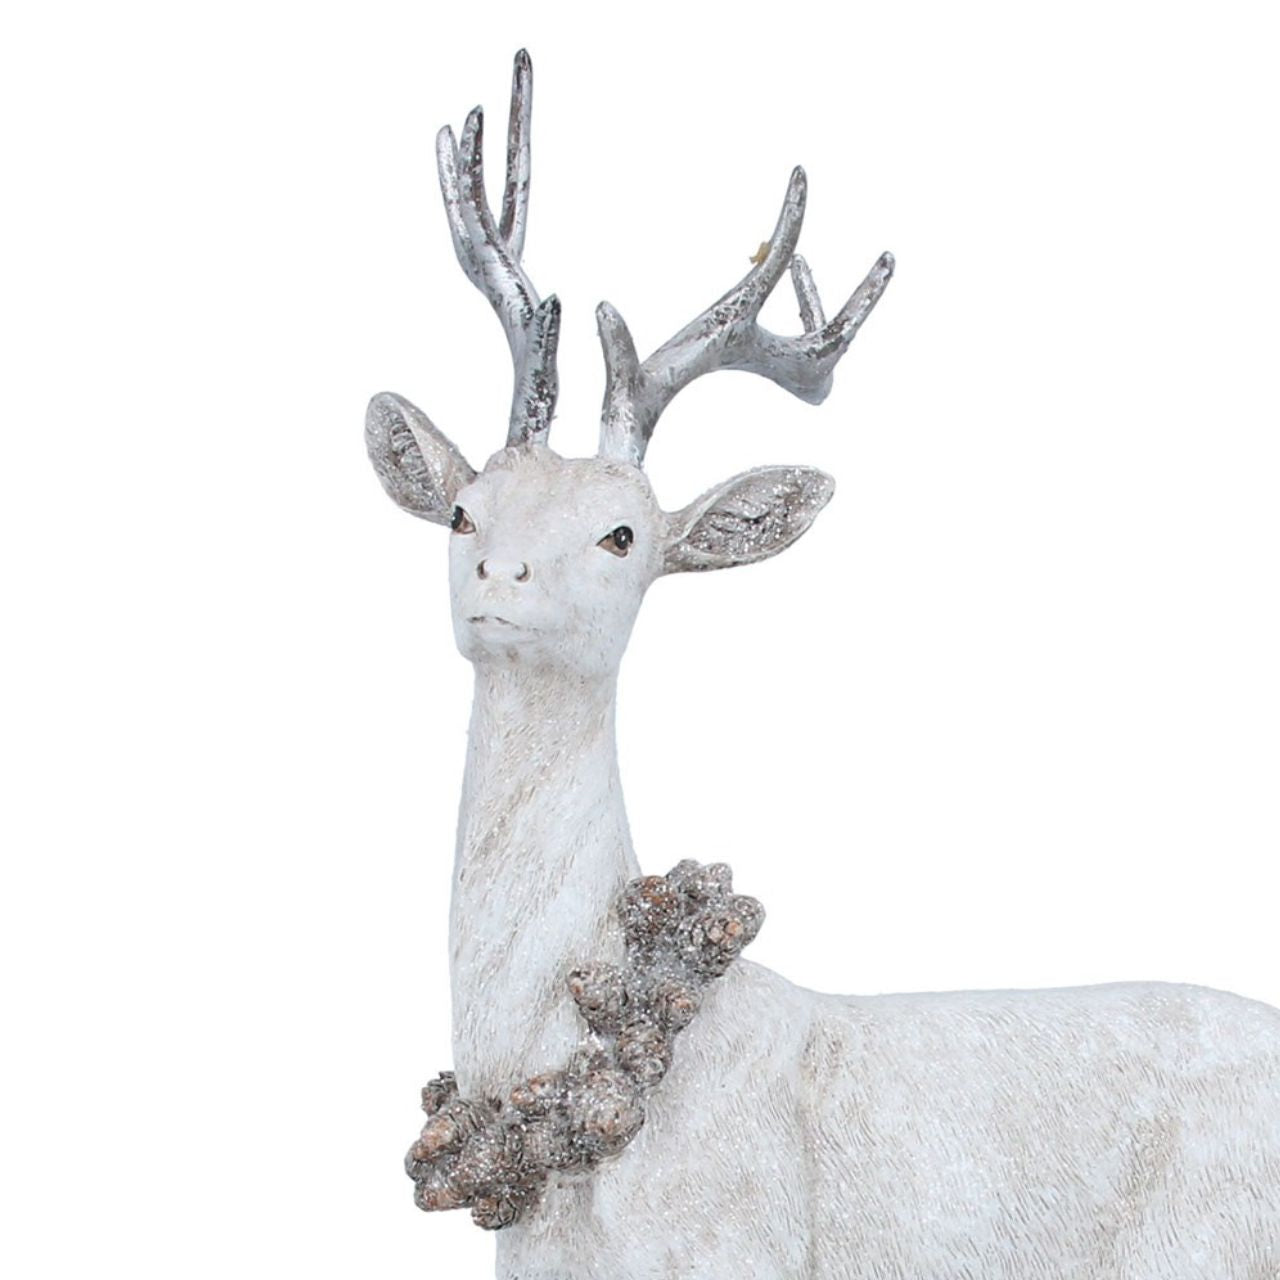 Gisela Graham Natural Resin Stag With Cone Wreath Christmas Ornament  Delight your holiday celebrations with this Gisela Graham natural resin Stag with Cone Wreath Christmas Ornament. Crafted from quality resin, this engaging holiday decoration is sure to add a festive touch to your décor. Give as a gift or keep it for your own home!